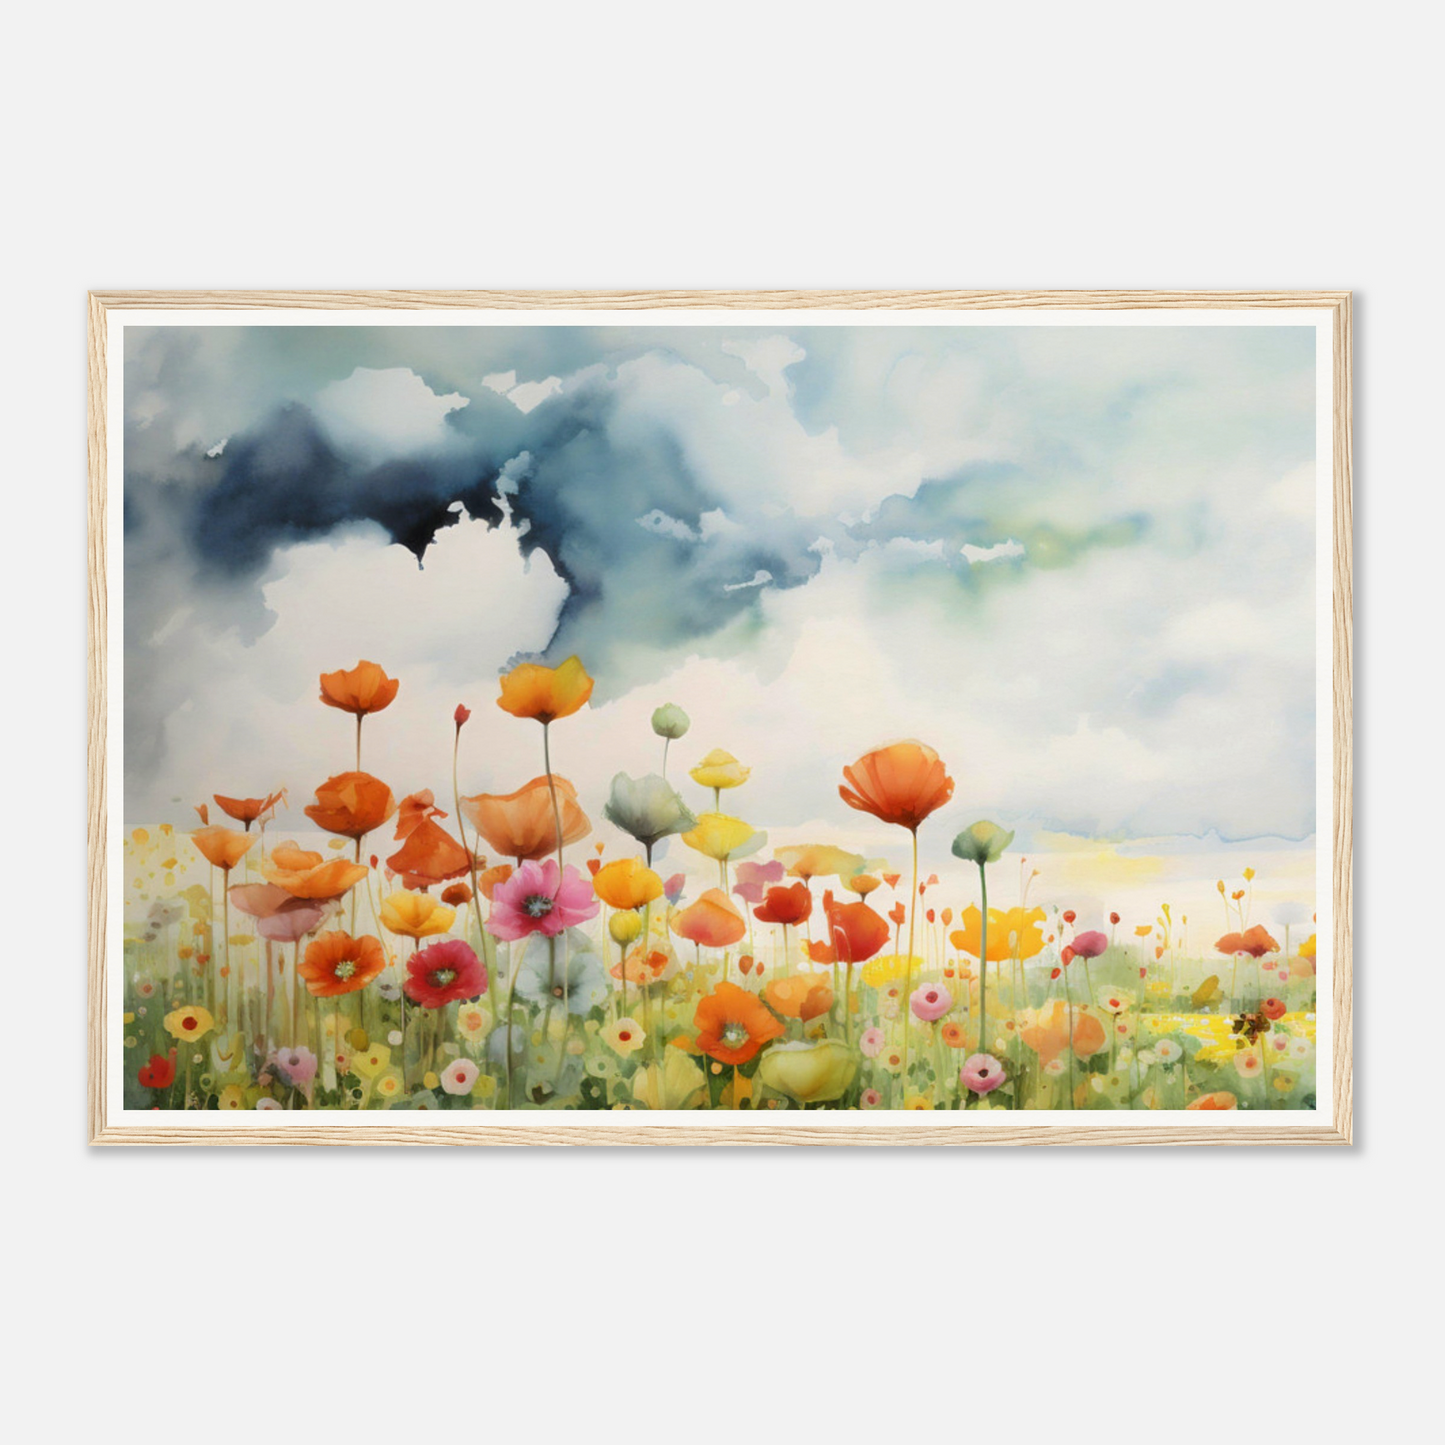 Flowery Heaven B The Oracle Windows™ Collection - framed art print that is guaranteed to transform your space.